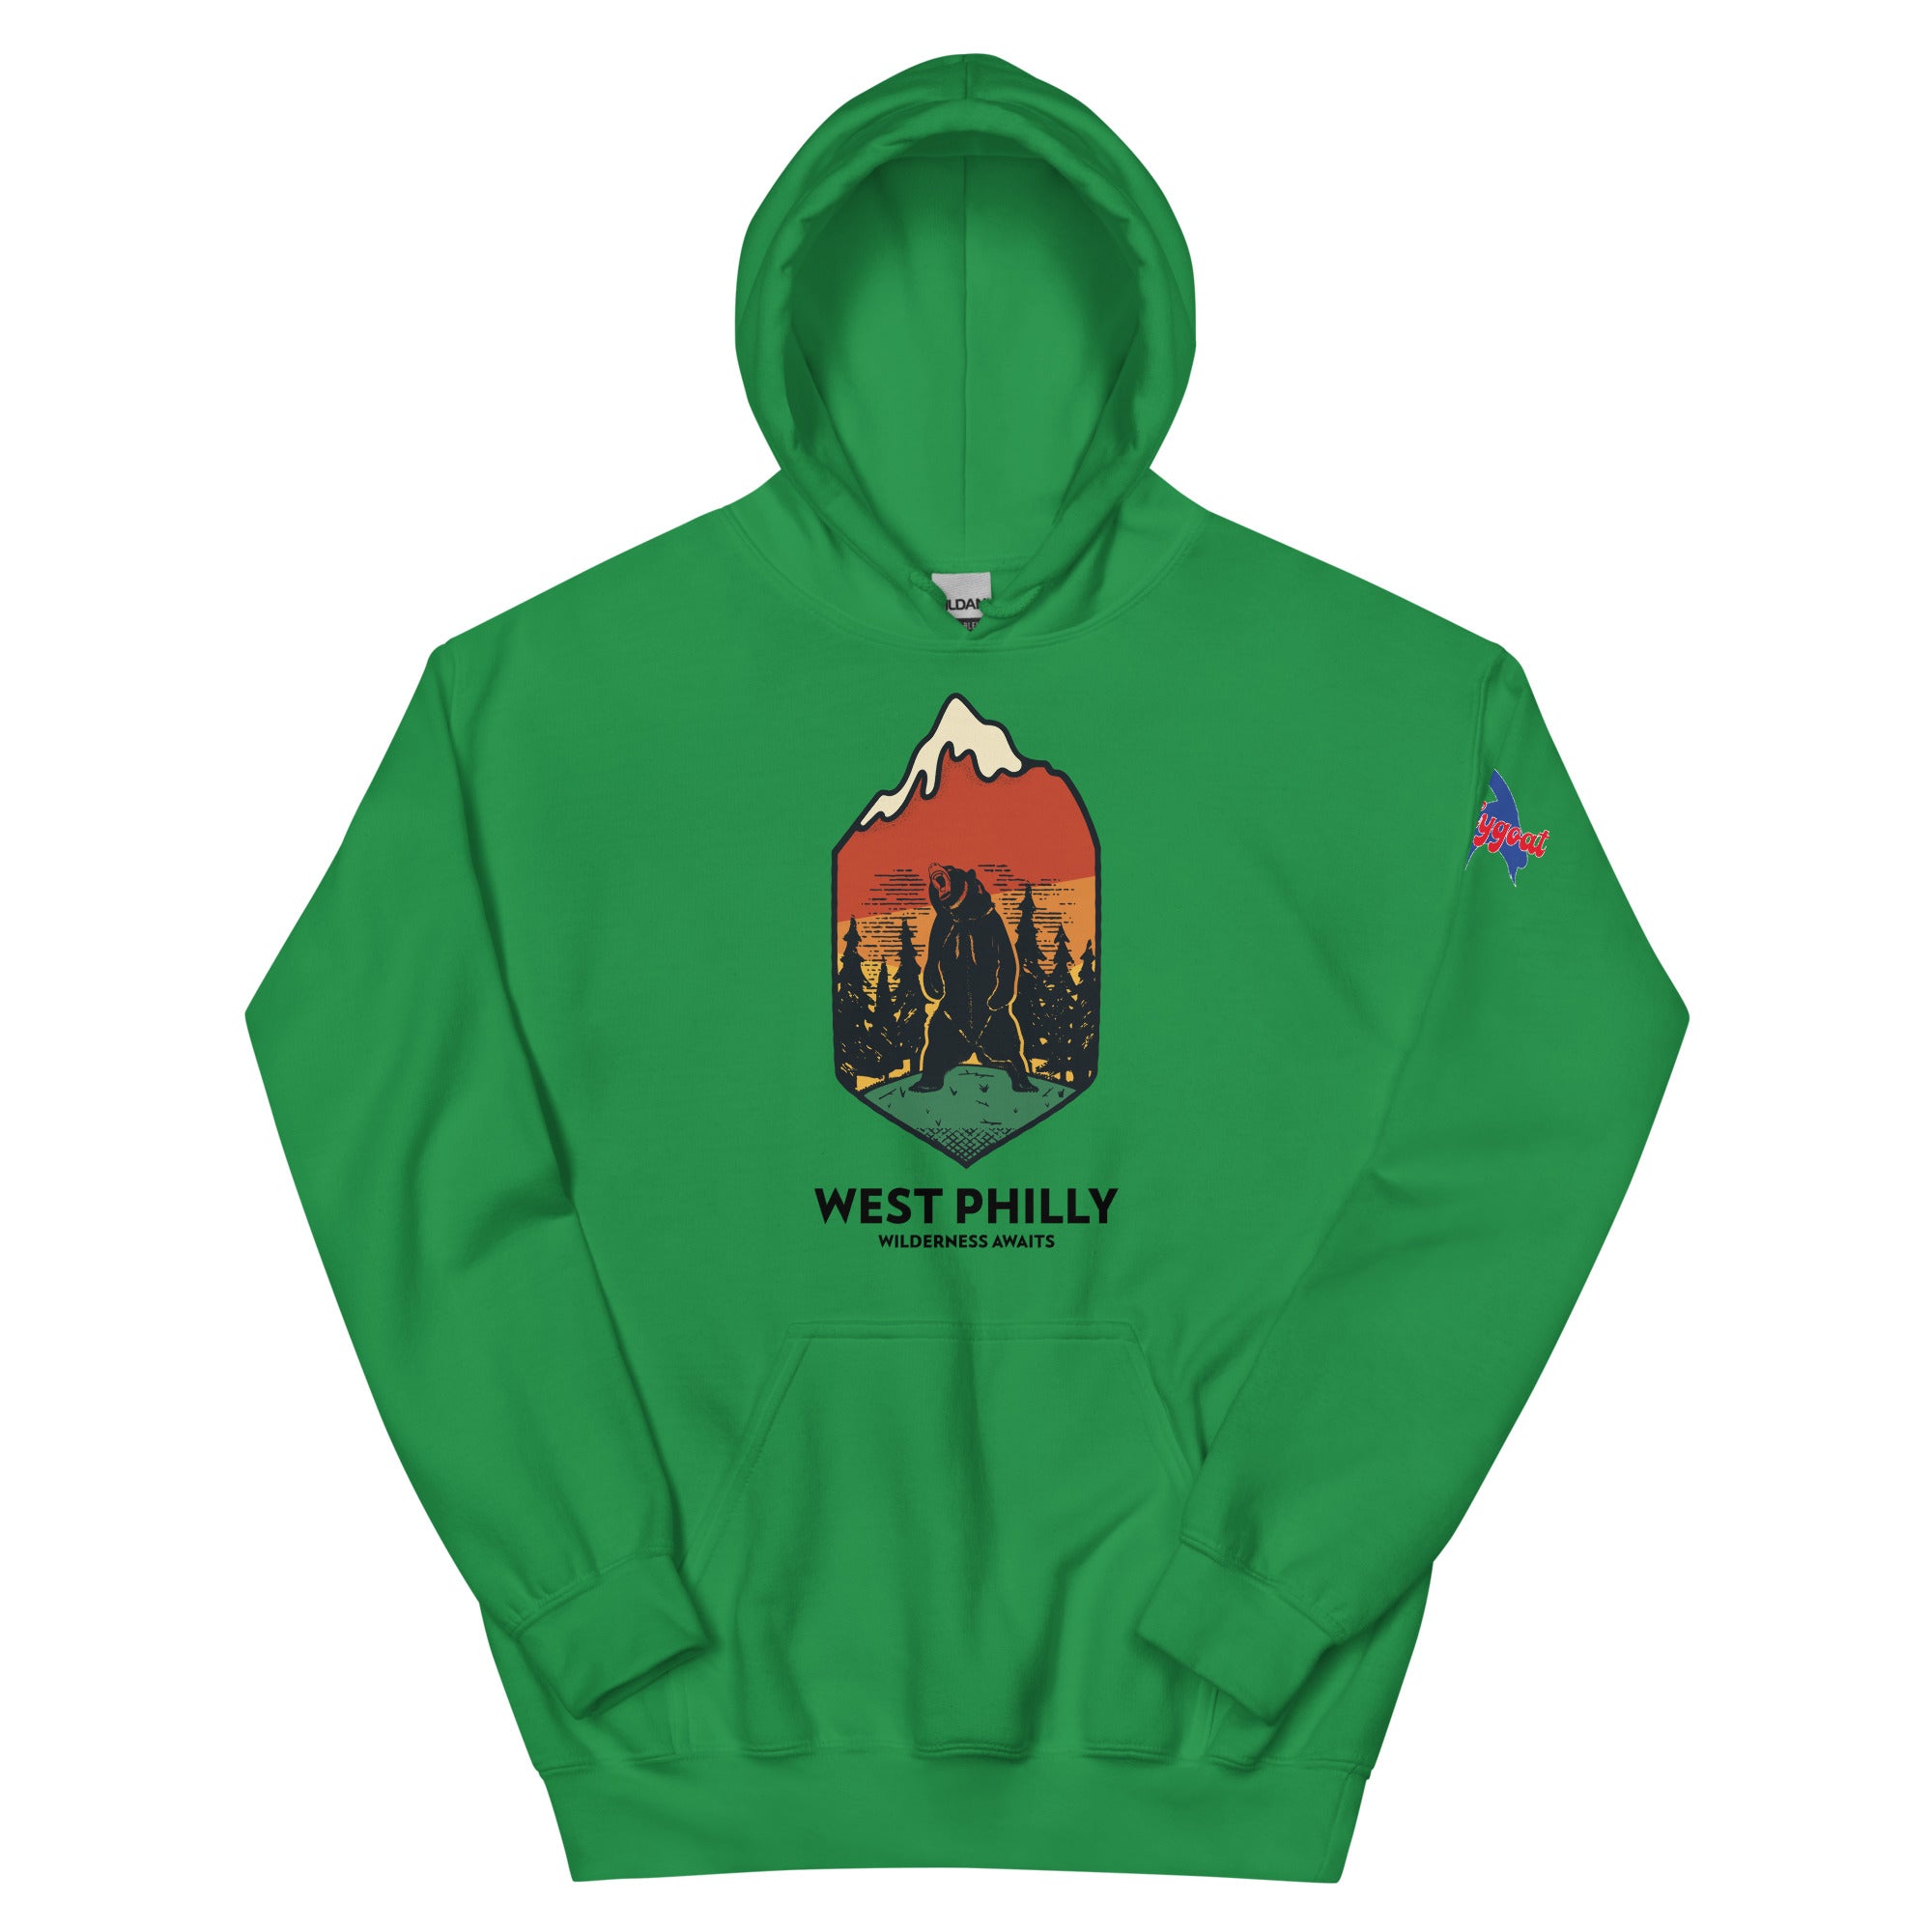 West Philly Philadelphia outdoors wilderness green hoodie Phillygoat